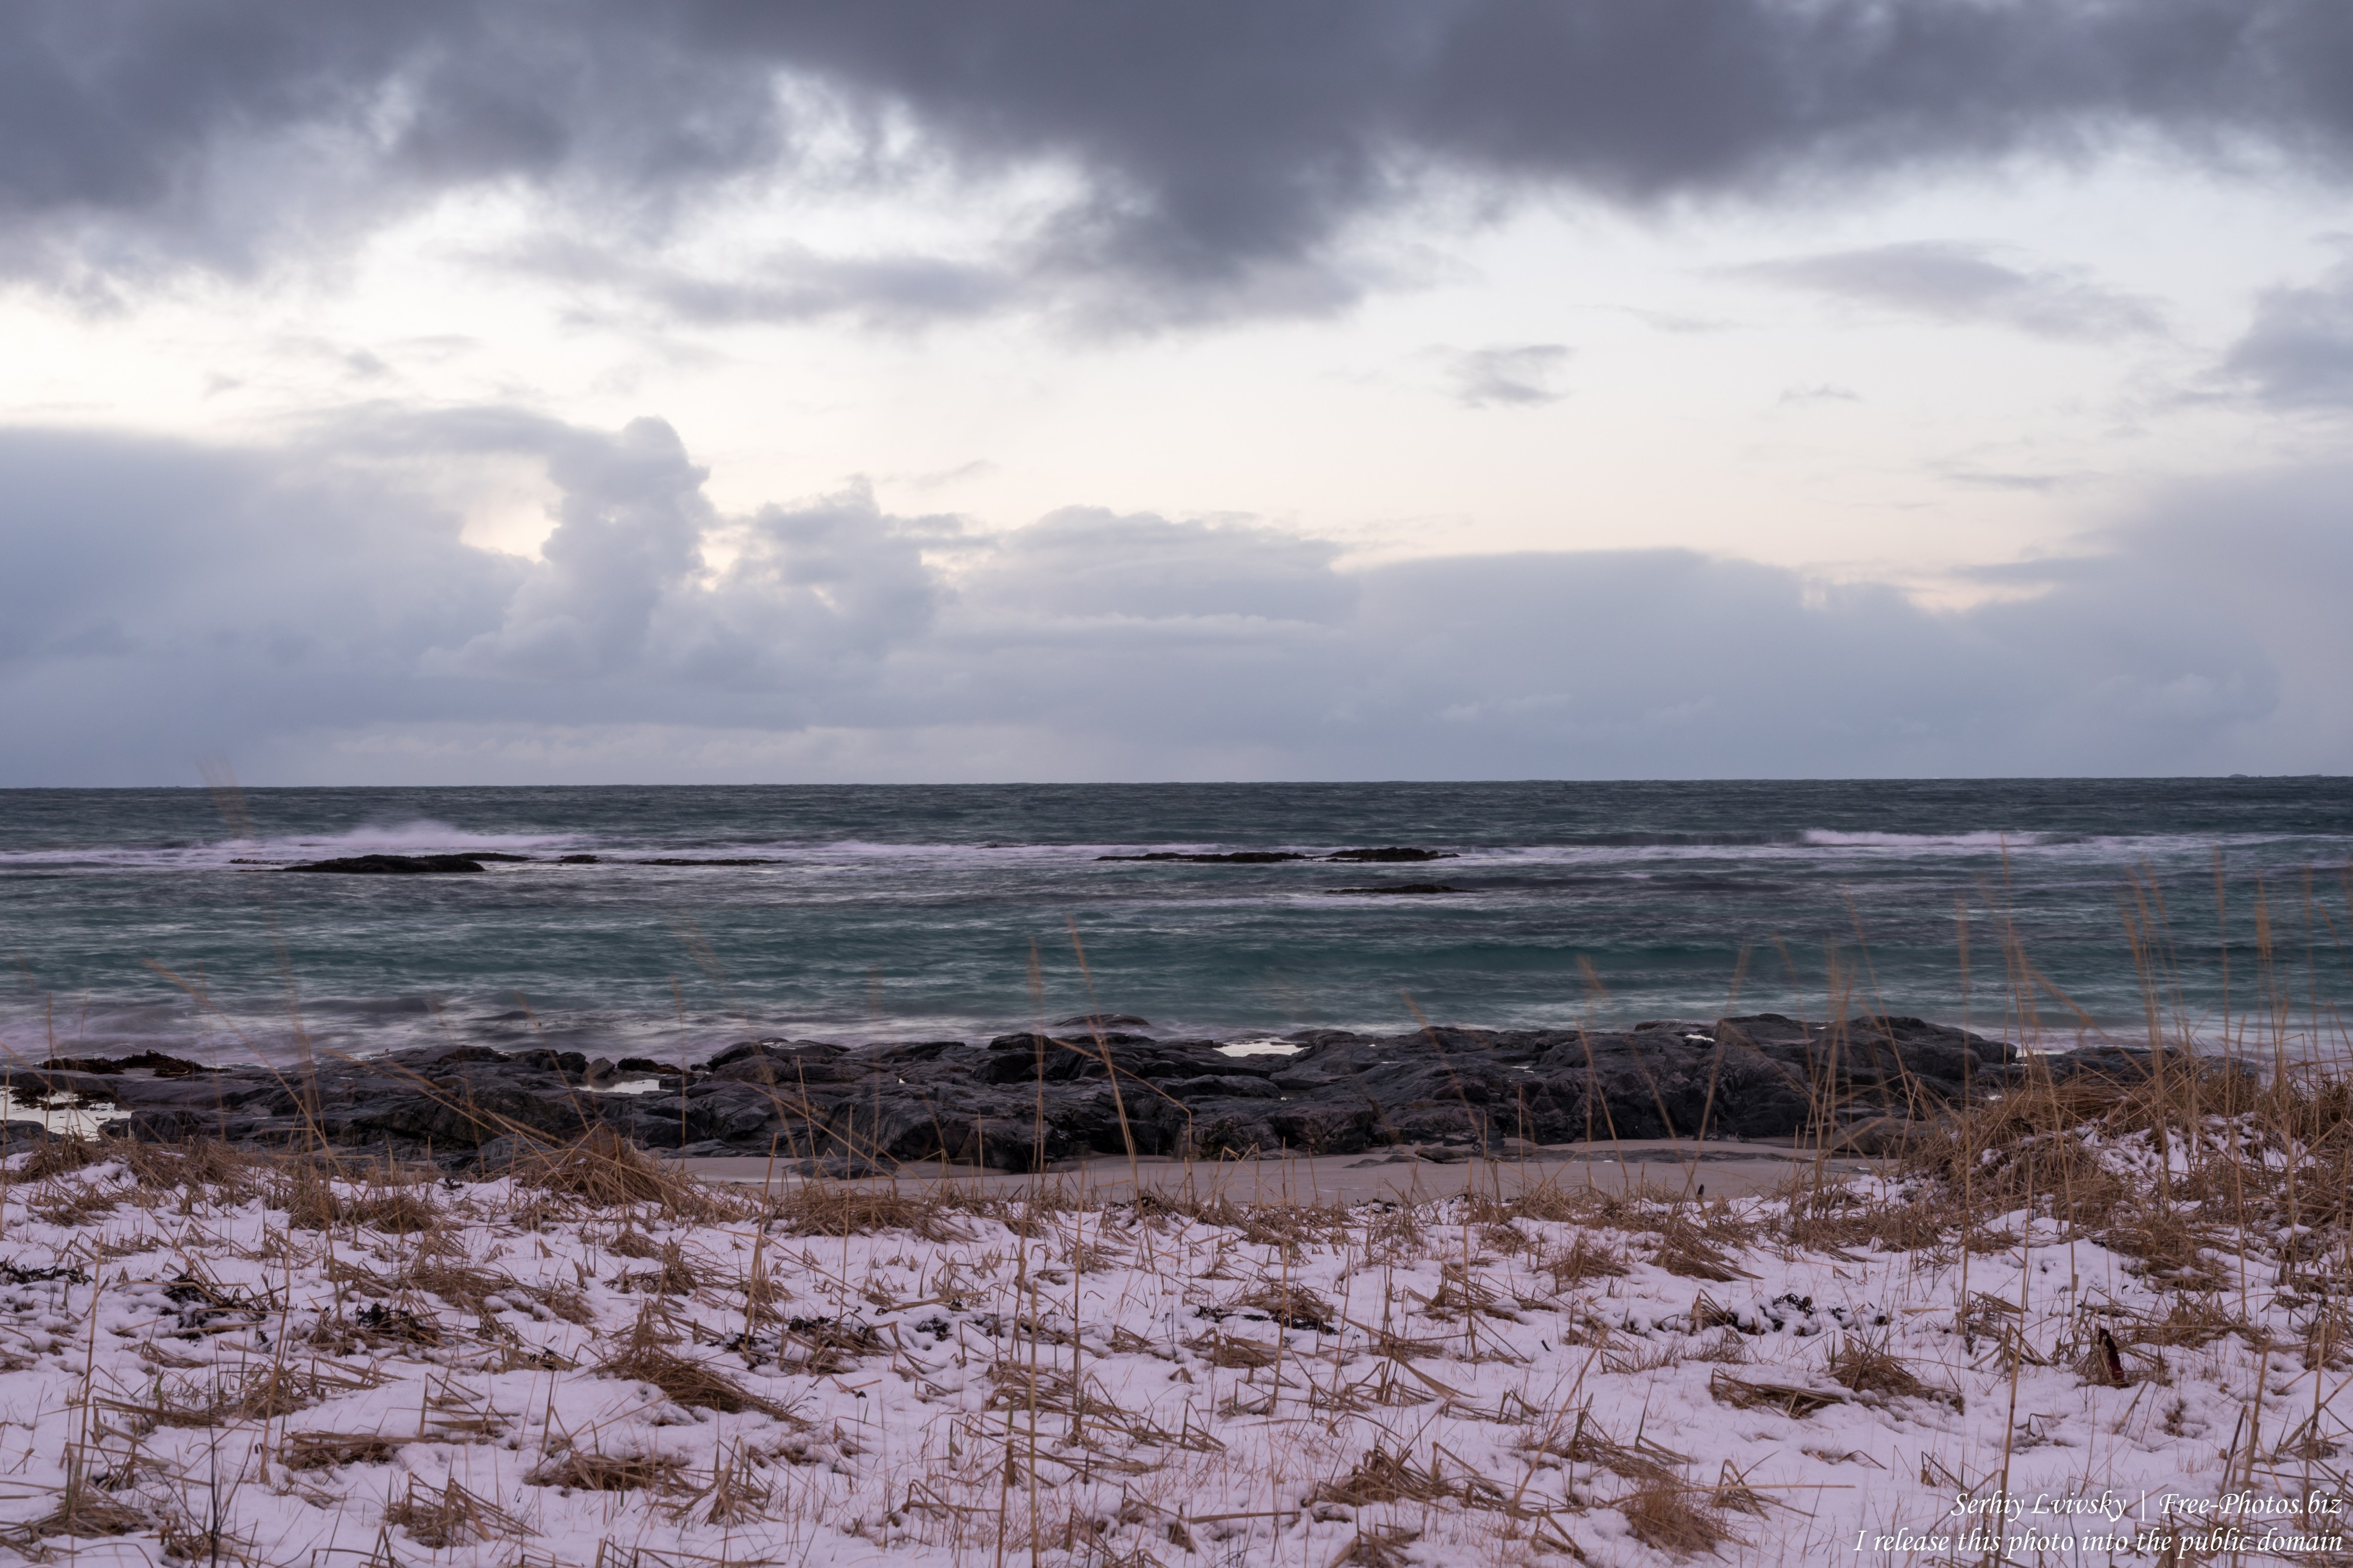 Skagsanden beach, Norway, photographed in February 2020 by Serhiy Lvivsky, picture 17